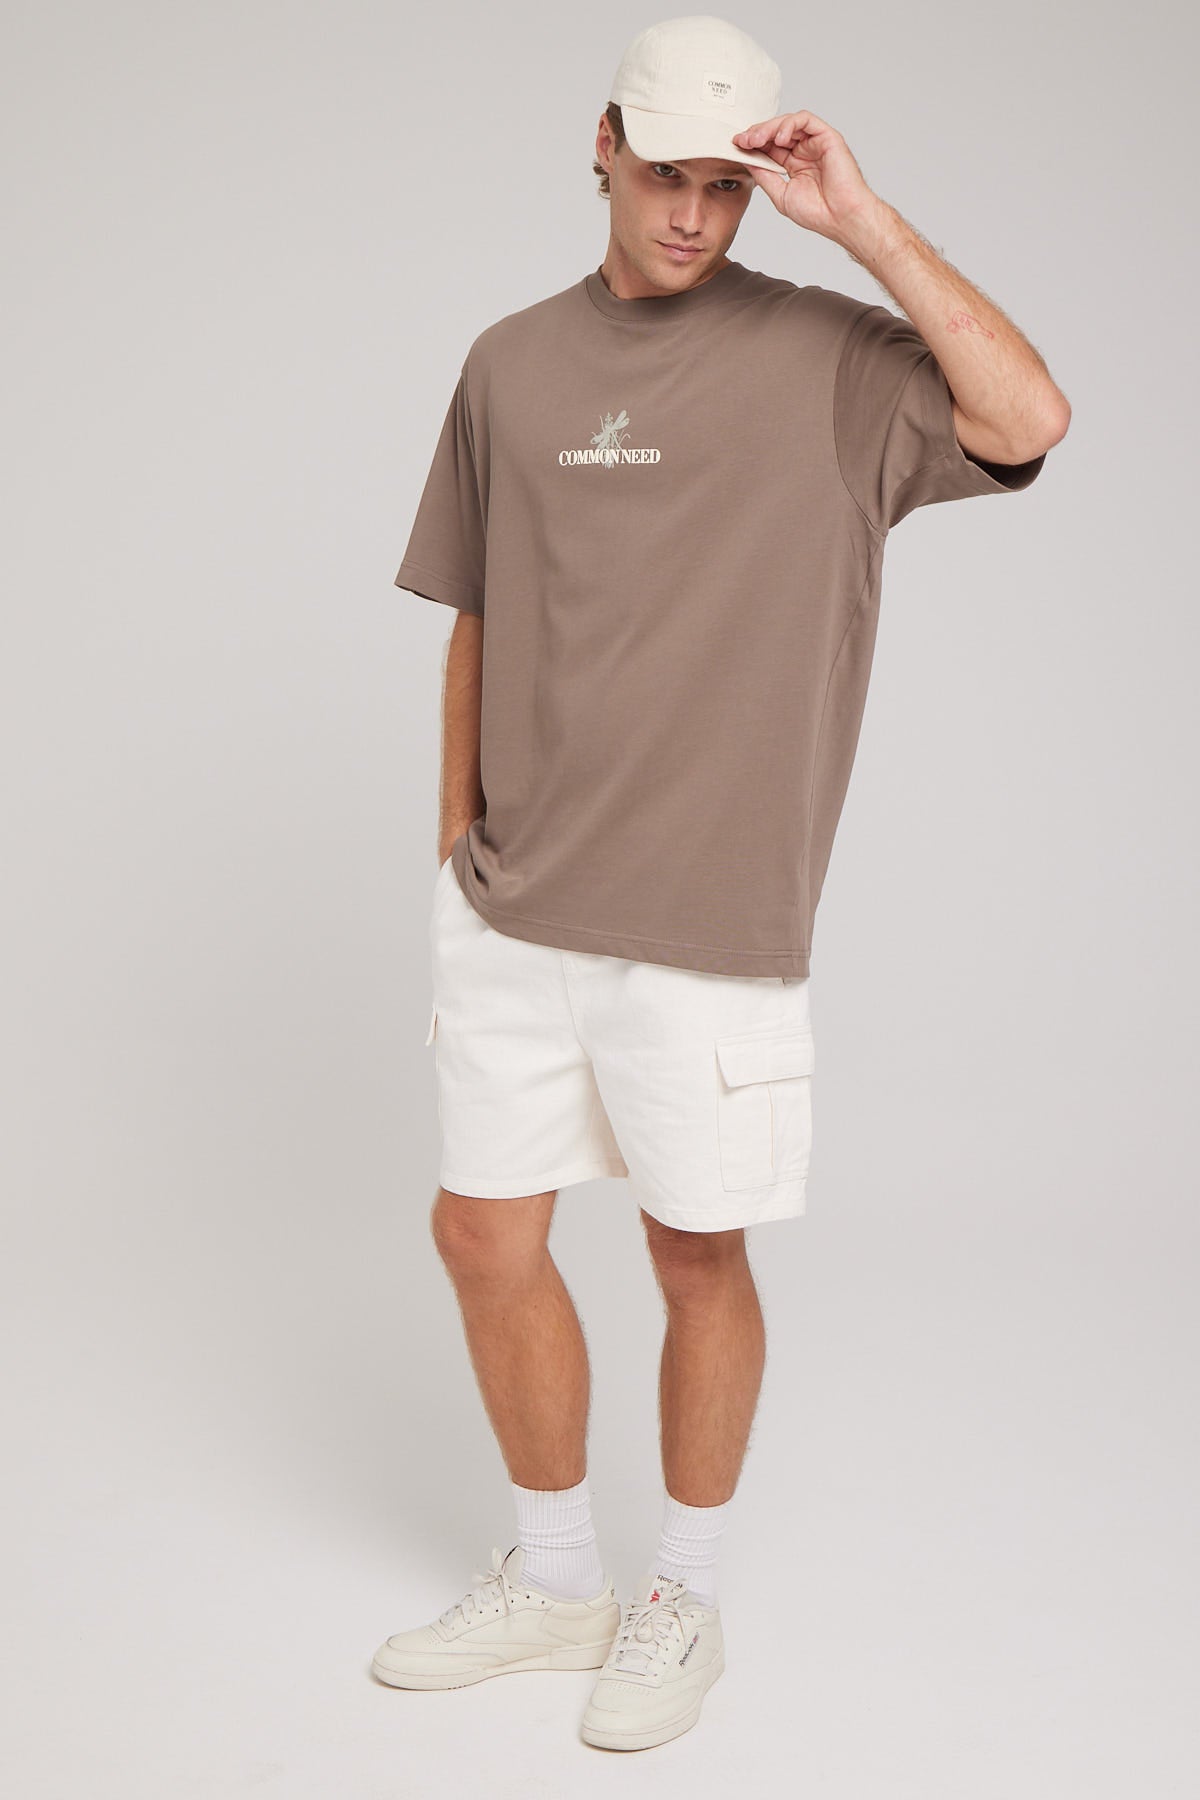 Common Need Relaxed Cargo Short White